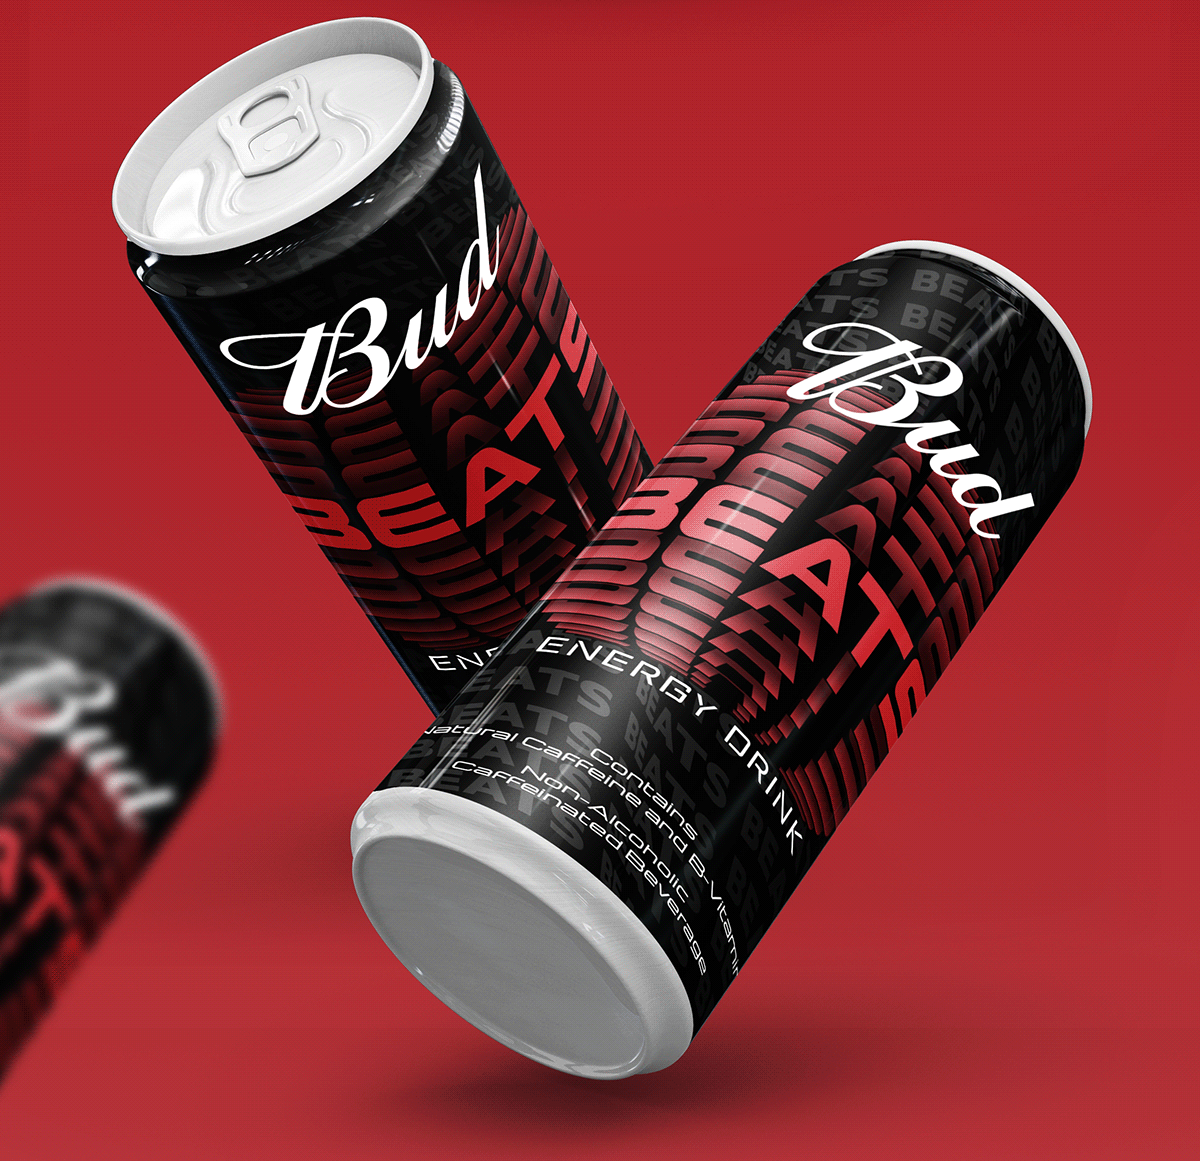 soft drink beer Beer Packaging energy drink Budweiser soda can alcohol packaging label design the fourth face ankur chaudhary